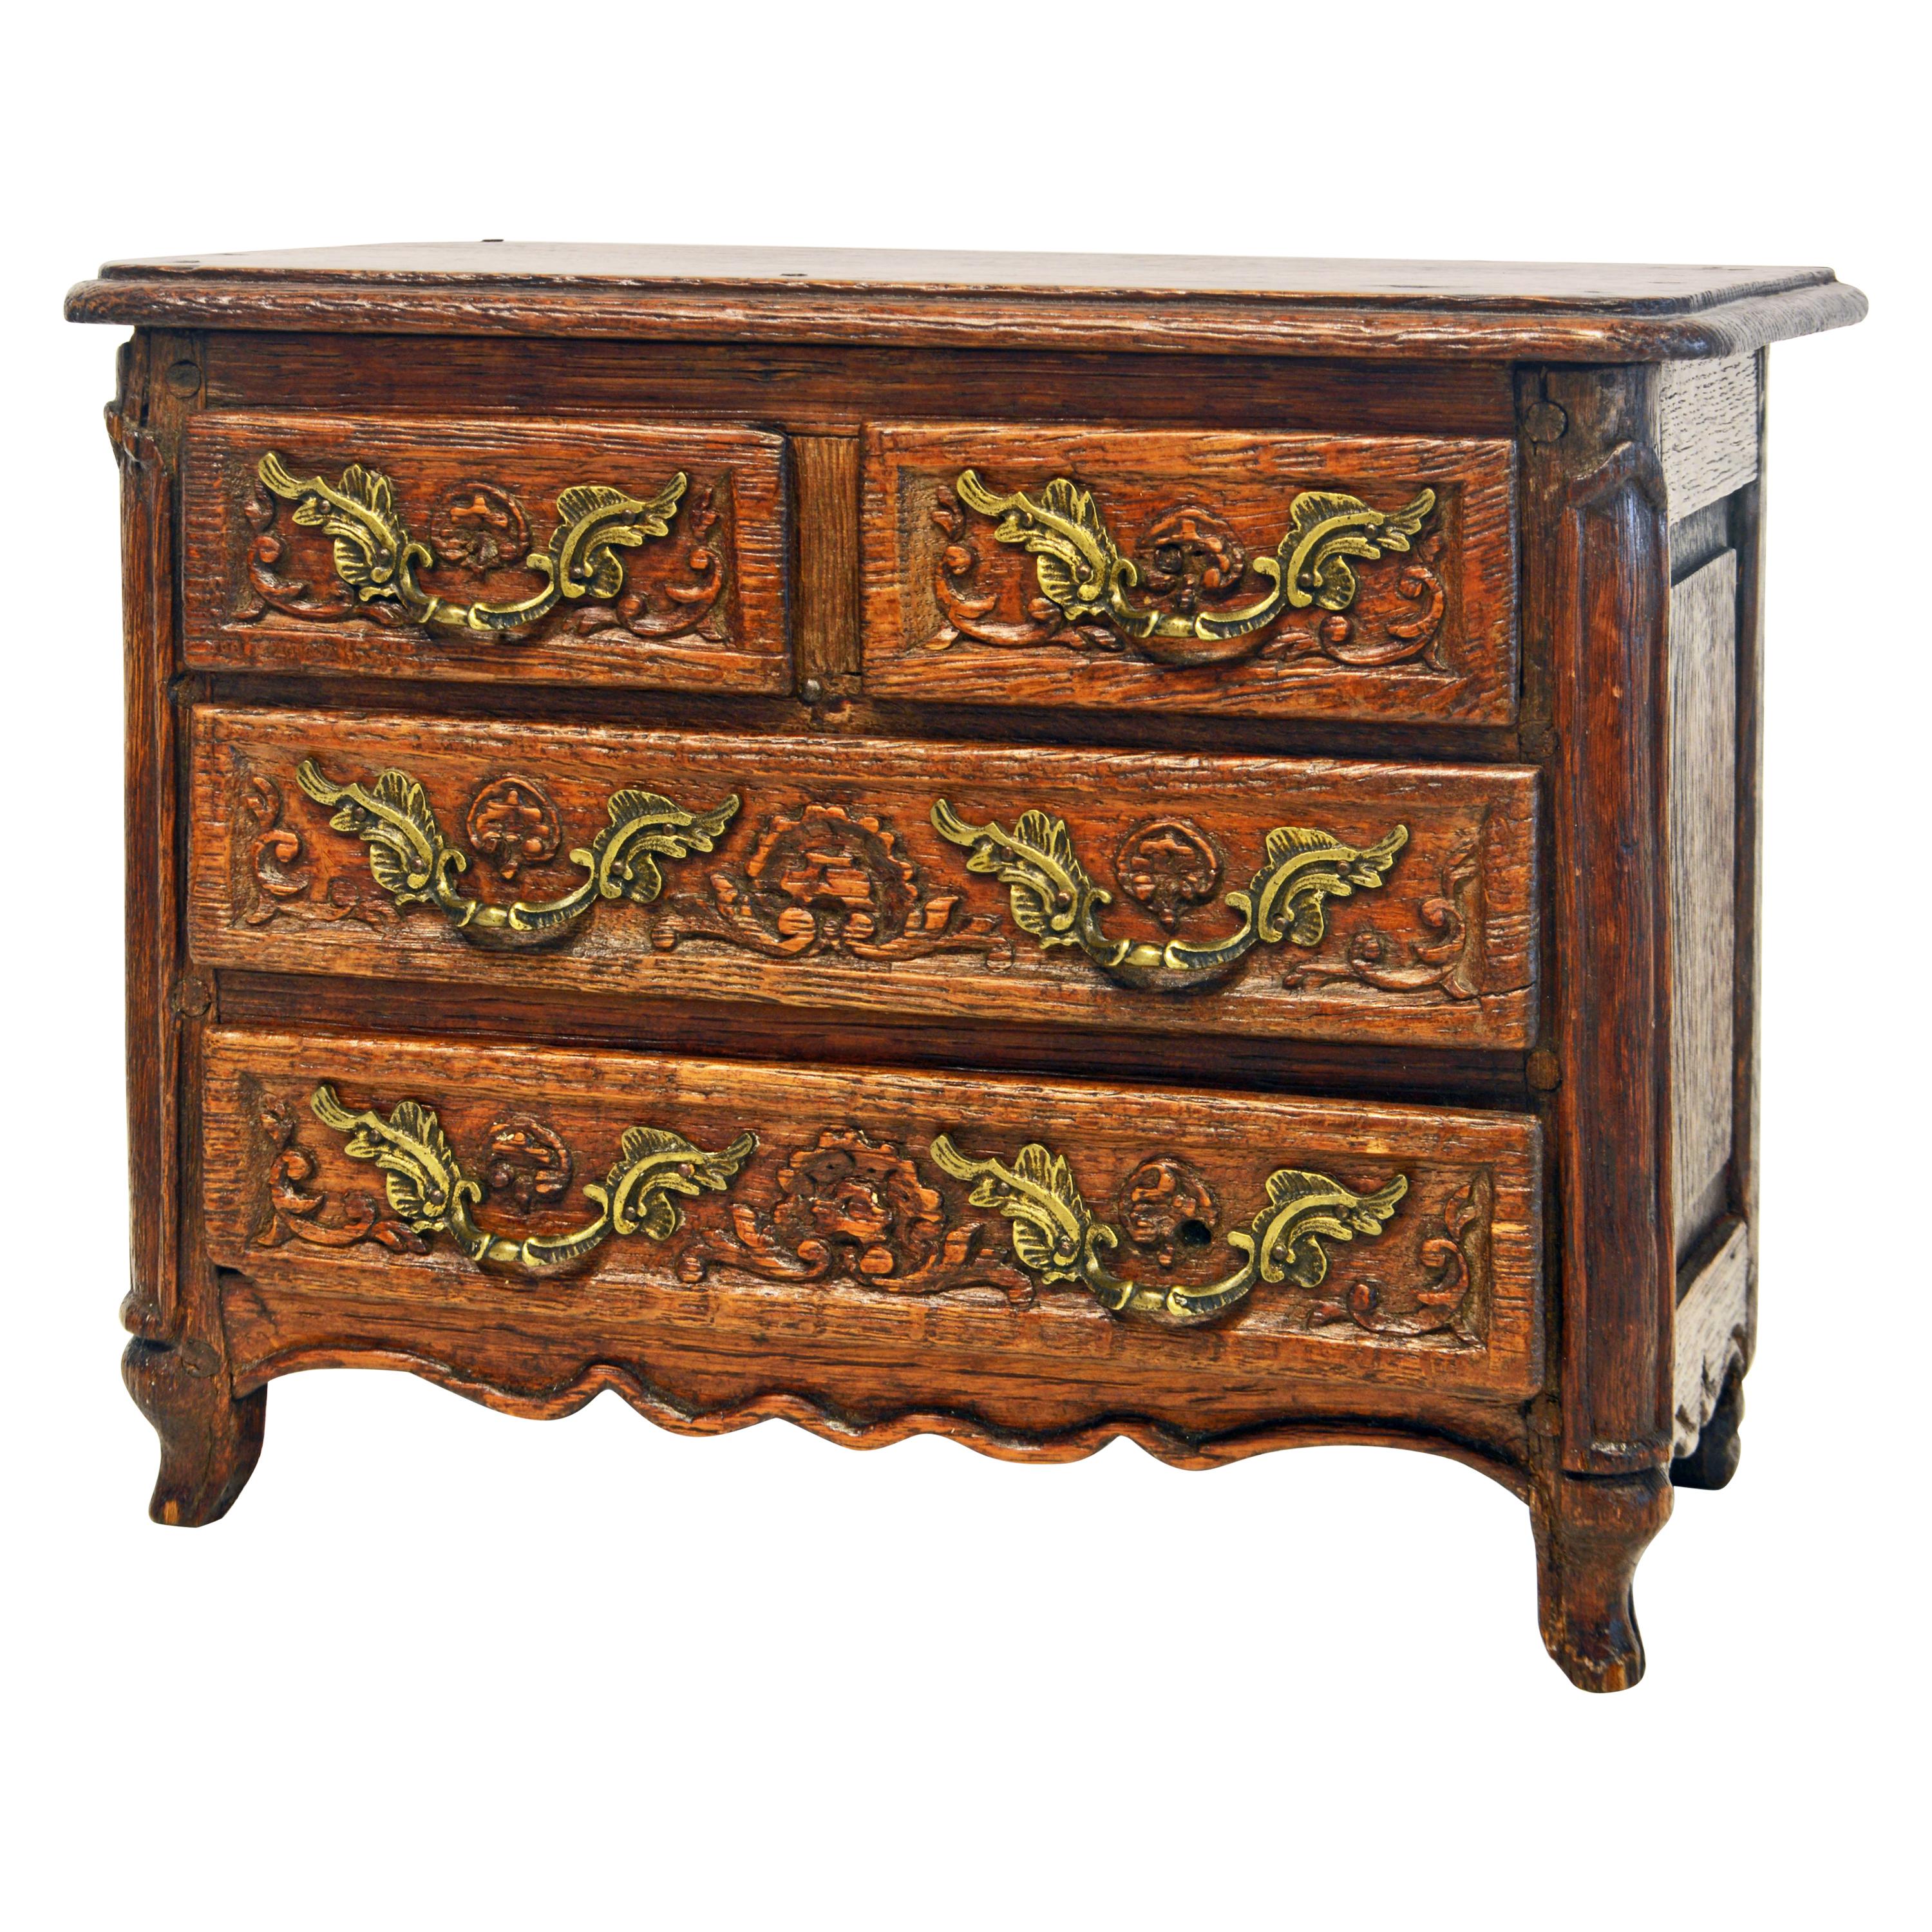 French Provincial Carved Louis XV Style Miniature Commode, Early 19th Century